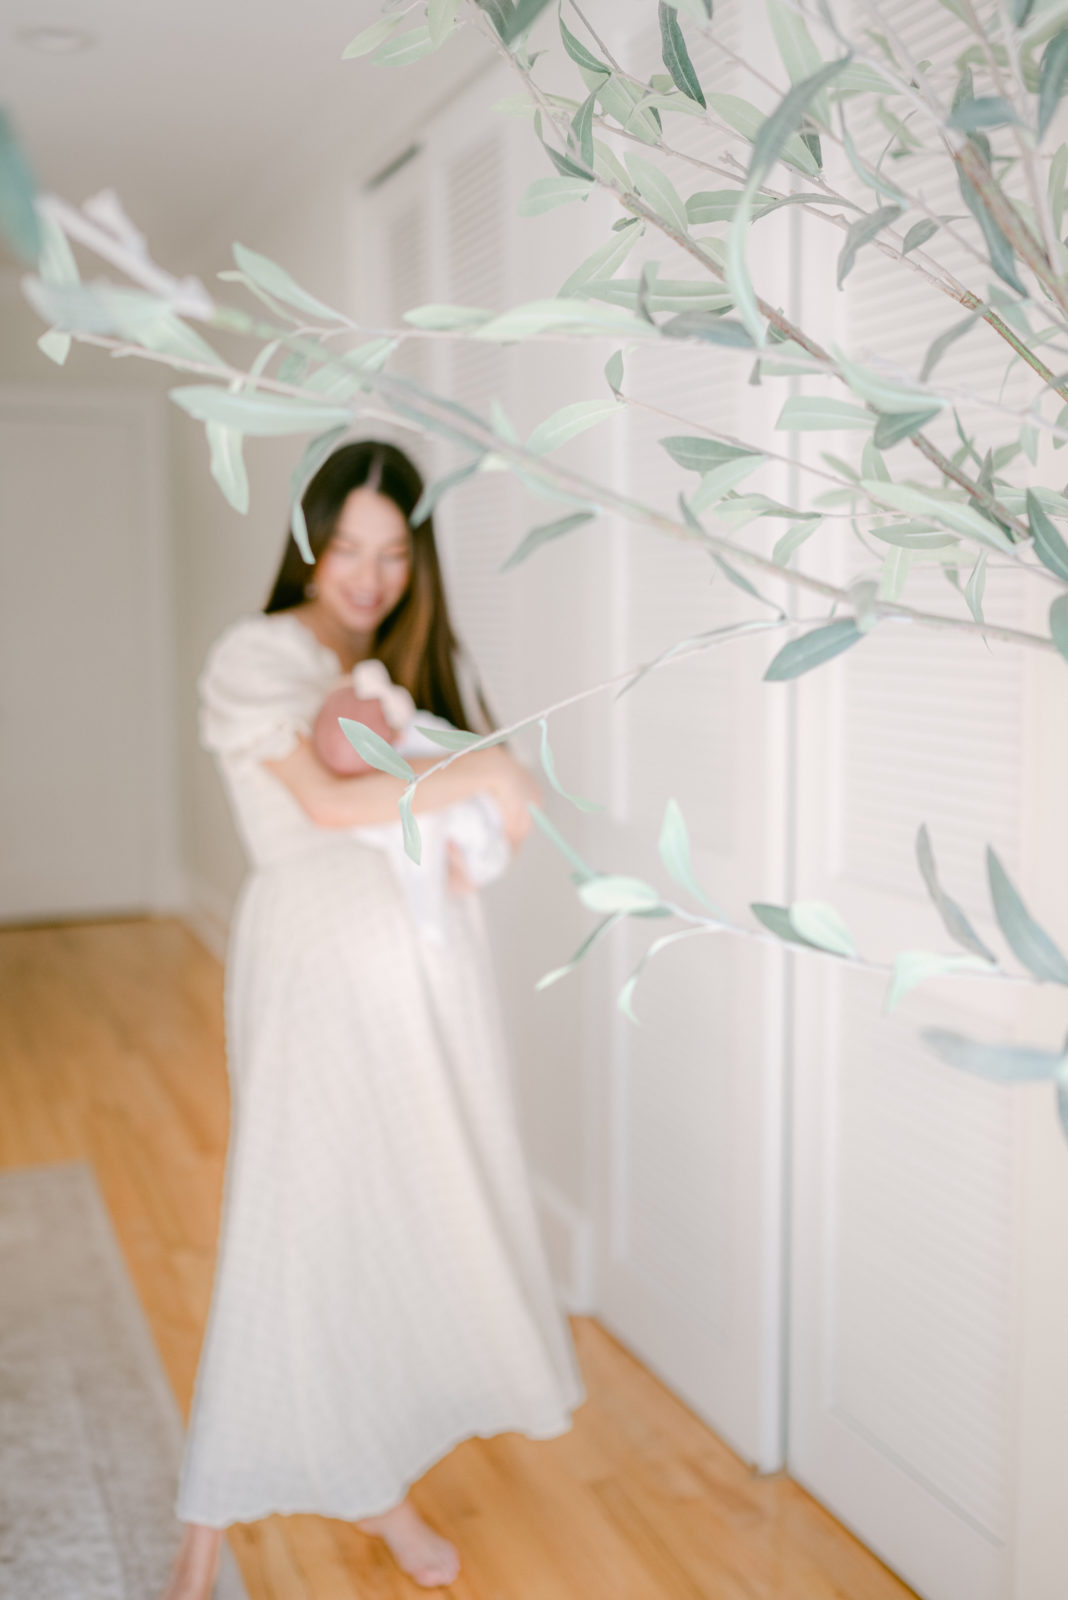 Dreamy, out of focus photo of mom rocking her newborn baby at home